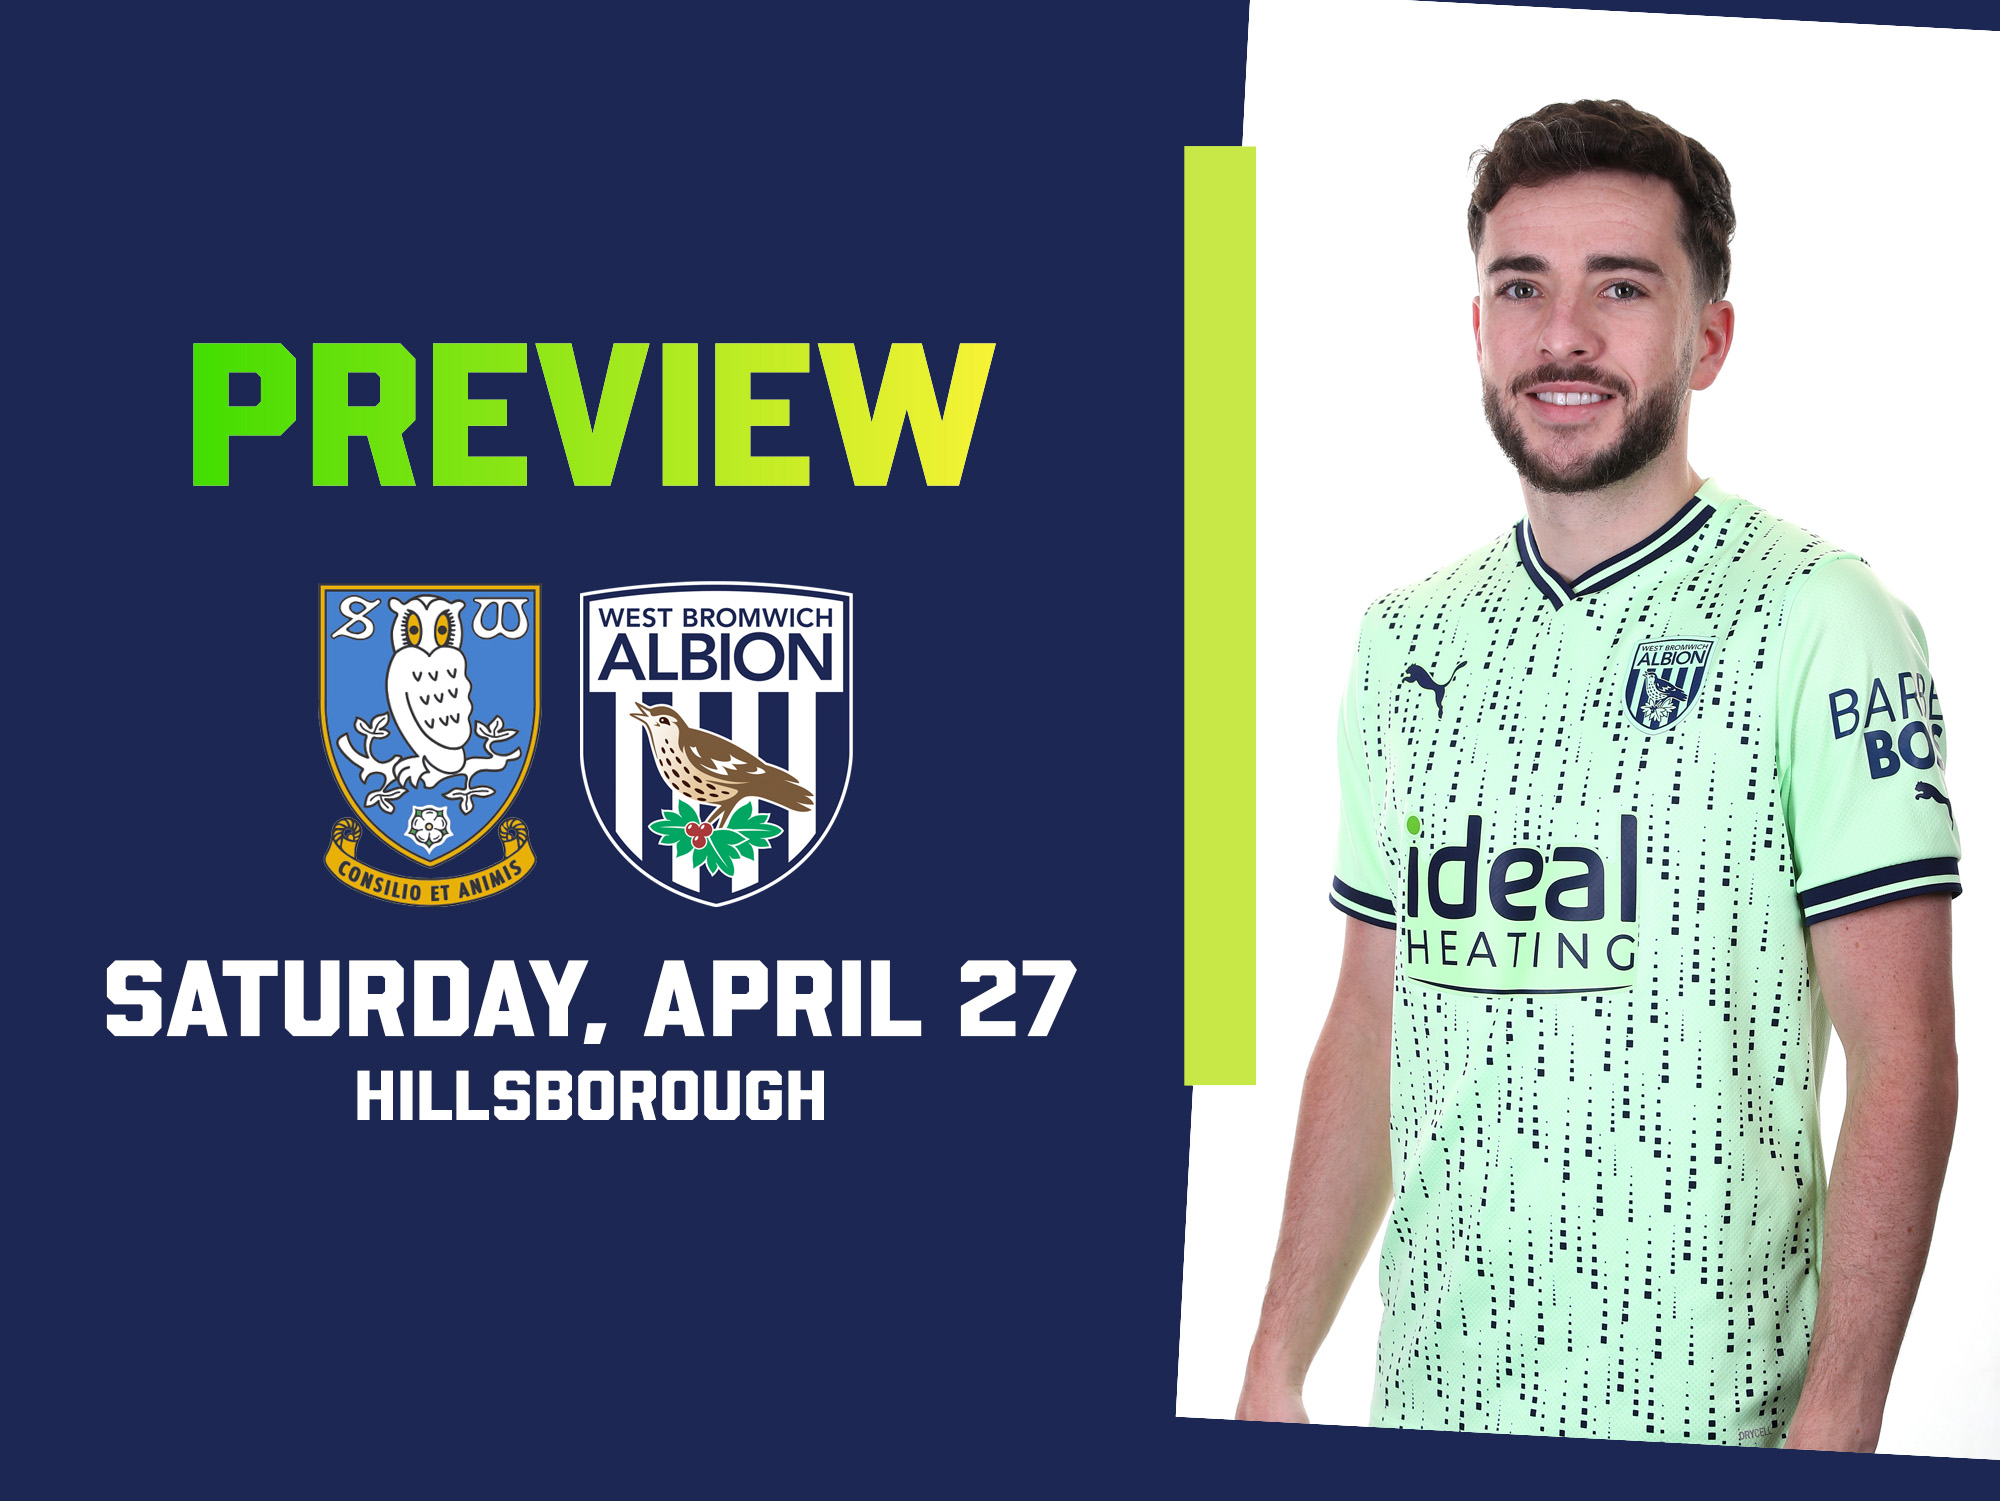 Sheffield Wednesday & WBA badges on the green away kit match preview graphic with an image of Mikey Johnston smiling at the camera while wearing a green away shirt